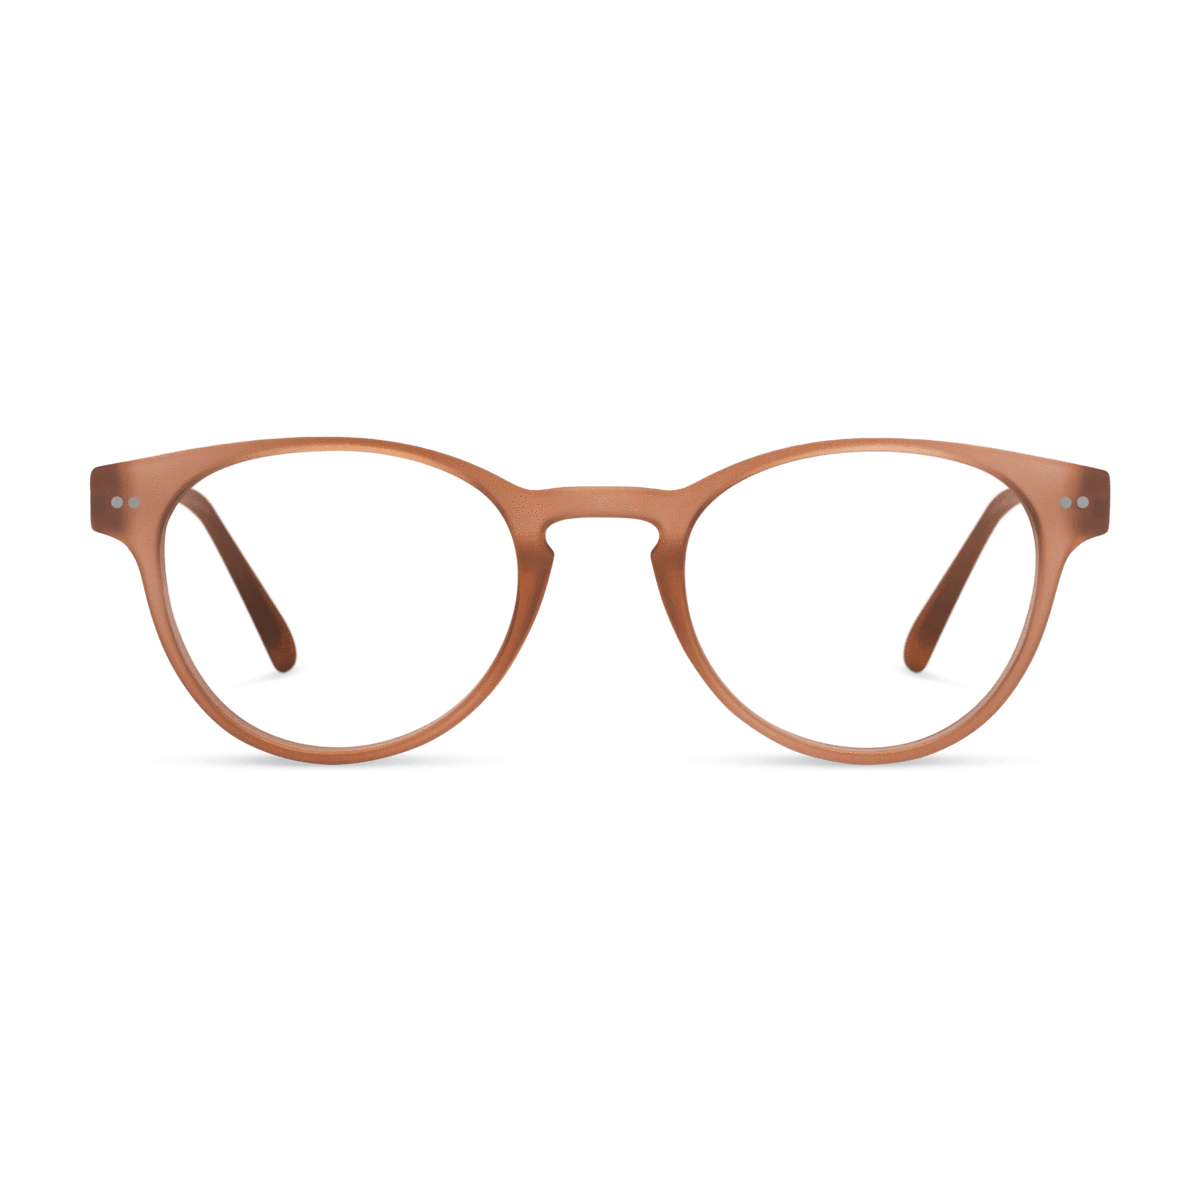 Abbey Readers READING GLASSES LOOK OPTIC (Champagne) +1.00 